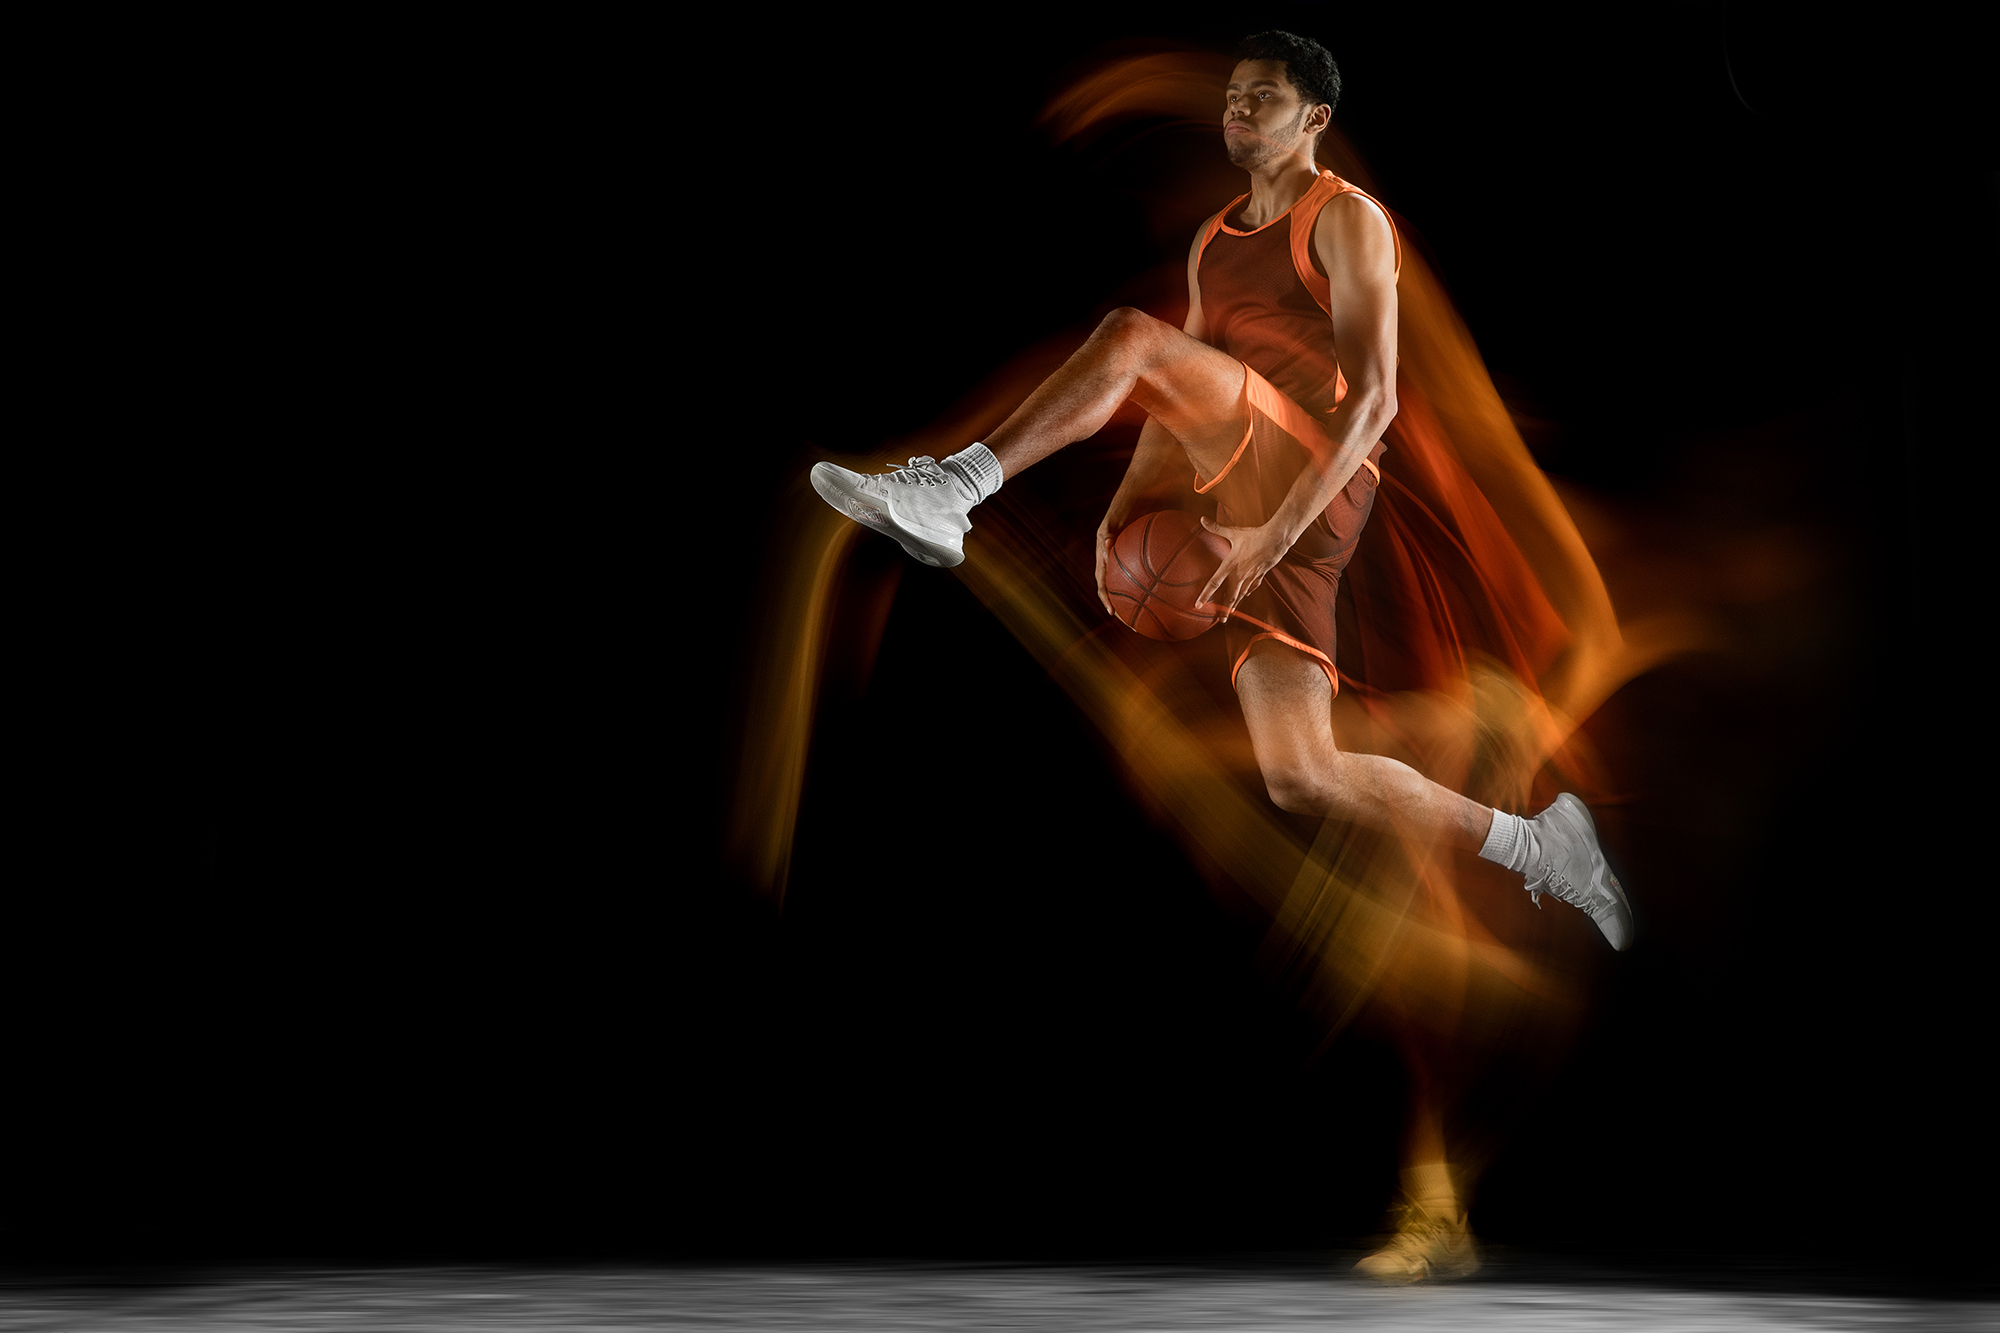 Fire. Young arabian muscular basketball player in action, motion isolated on black background in mixed light. Concept of sport, movement, energy and dynamic, healthy lifestyle. Training, practicing.